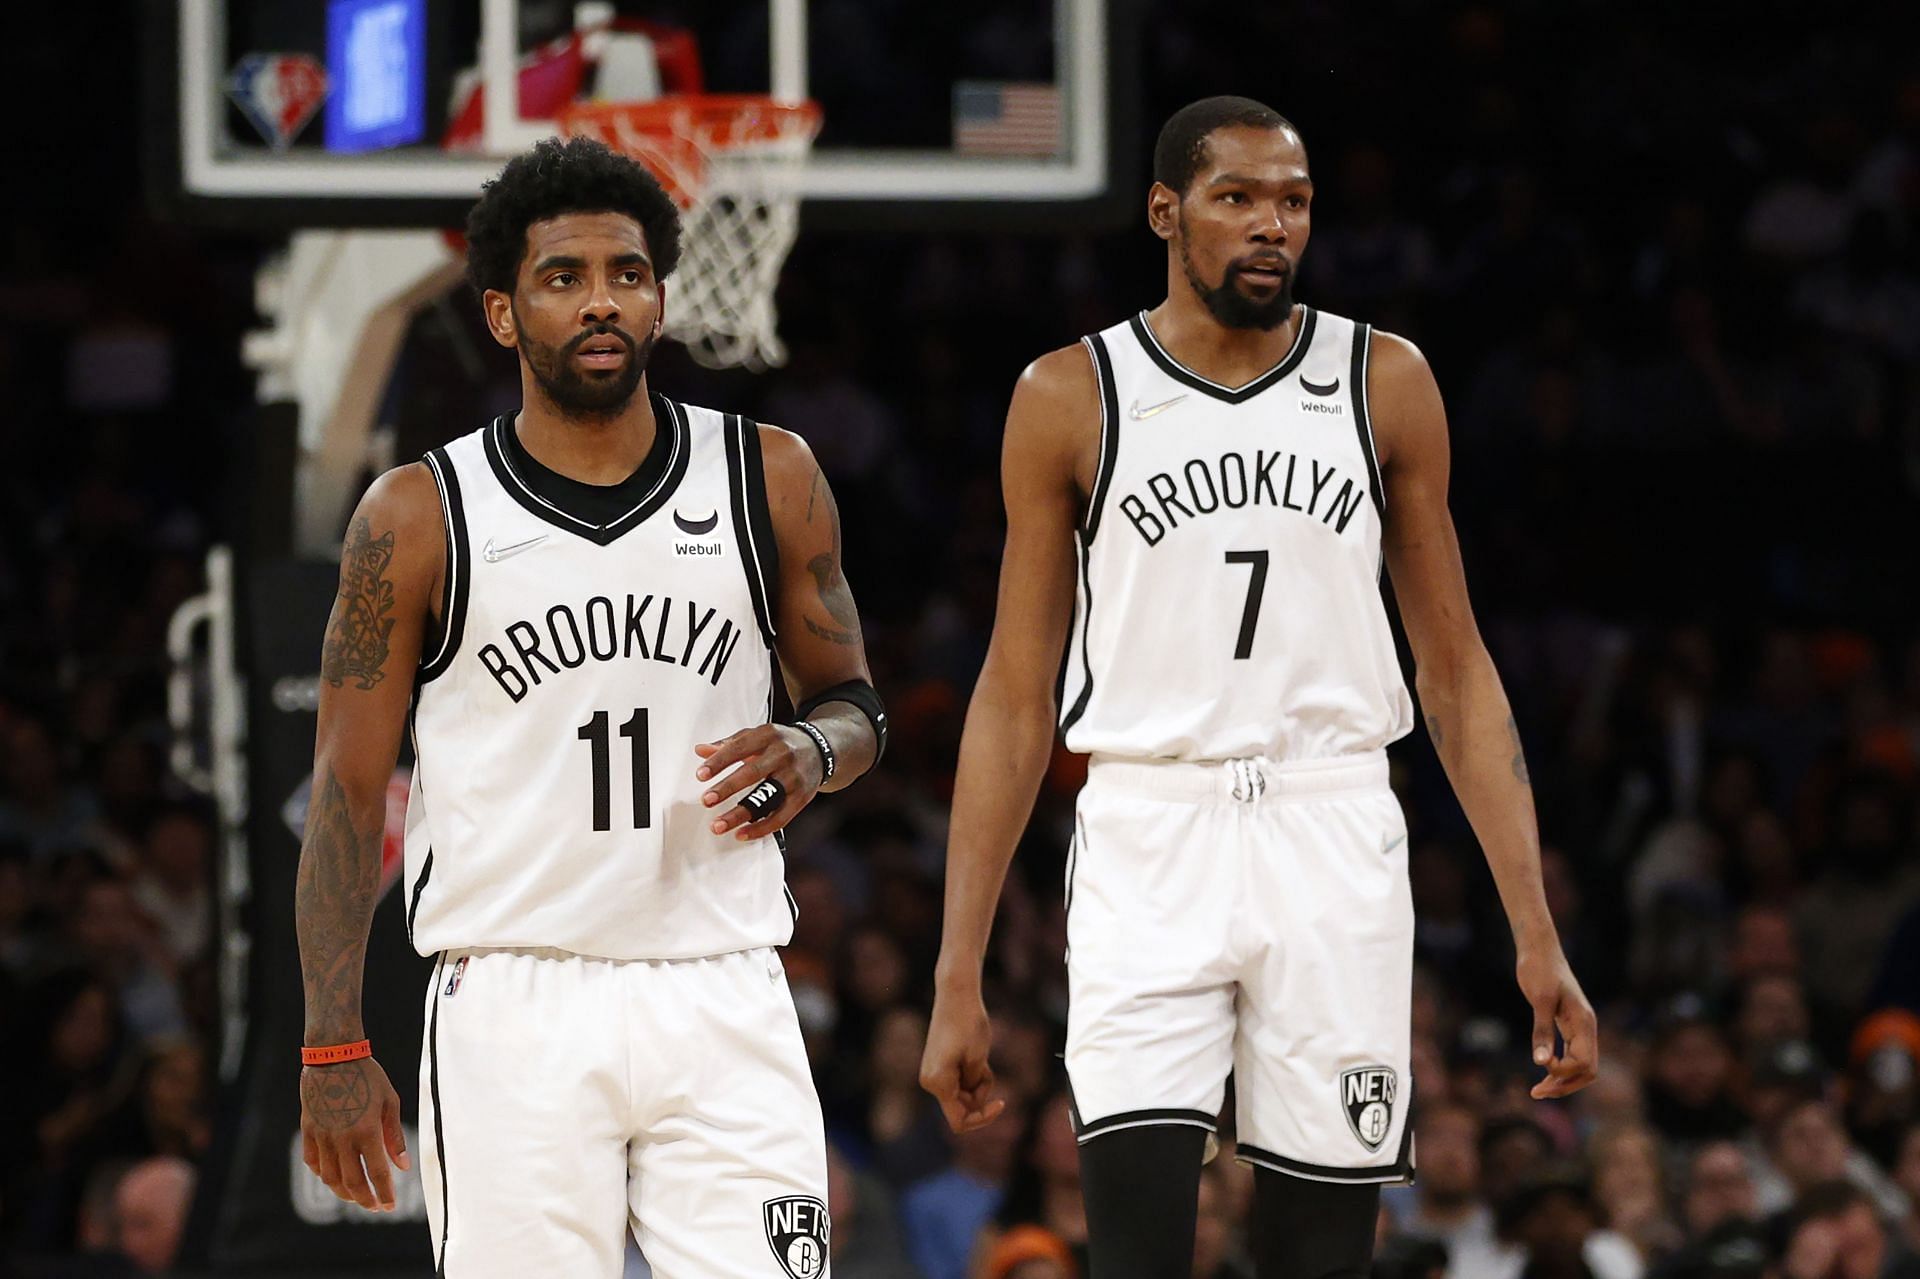 Kevin Durant and Kyrie Irving share the floor for the Brooklyn Nets